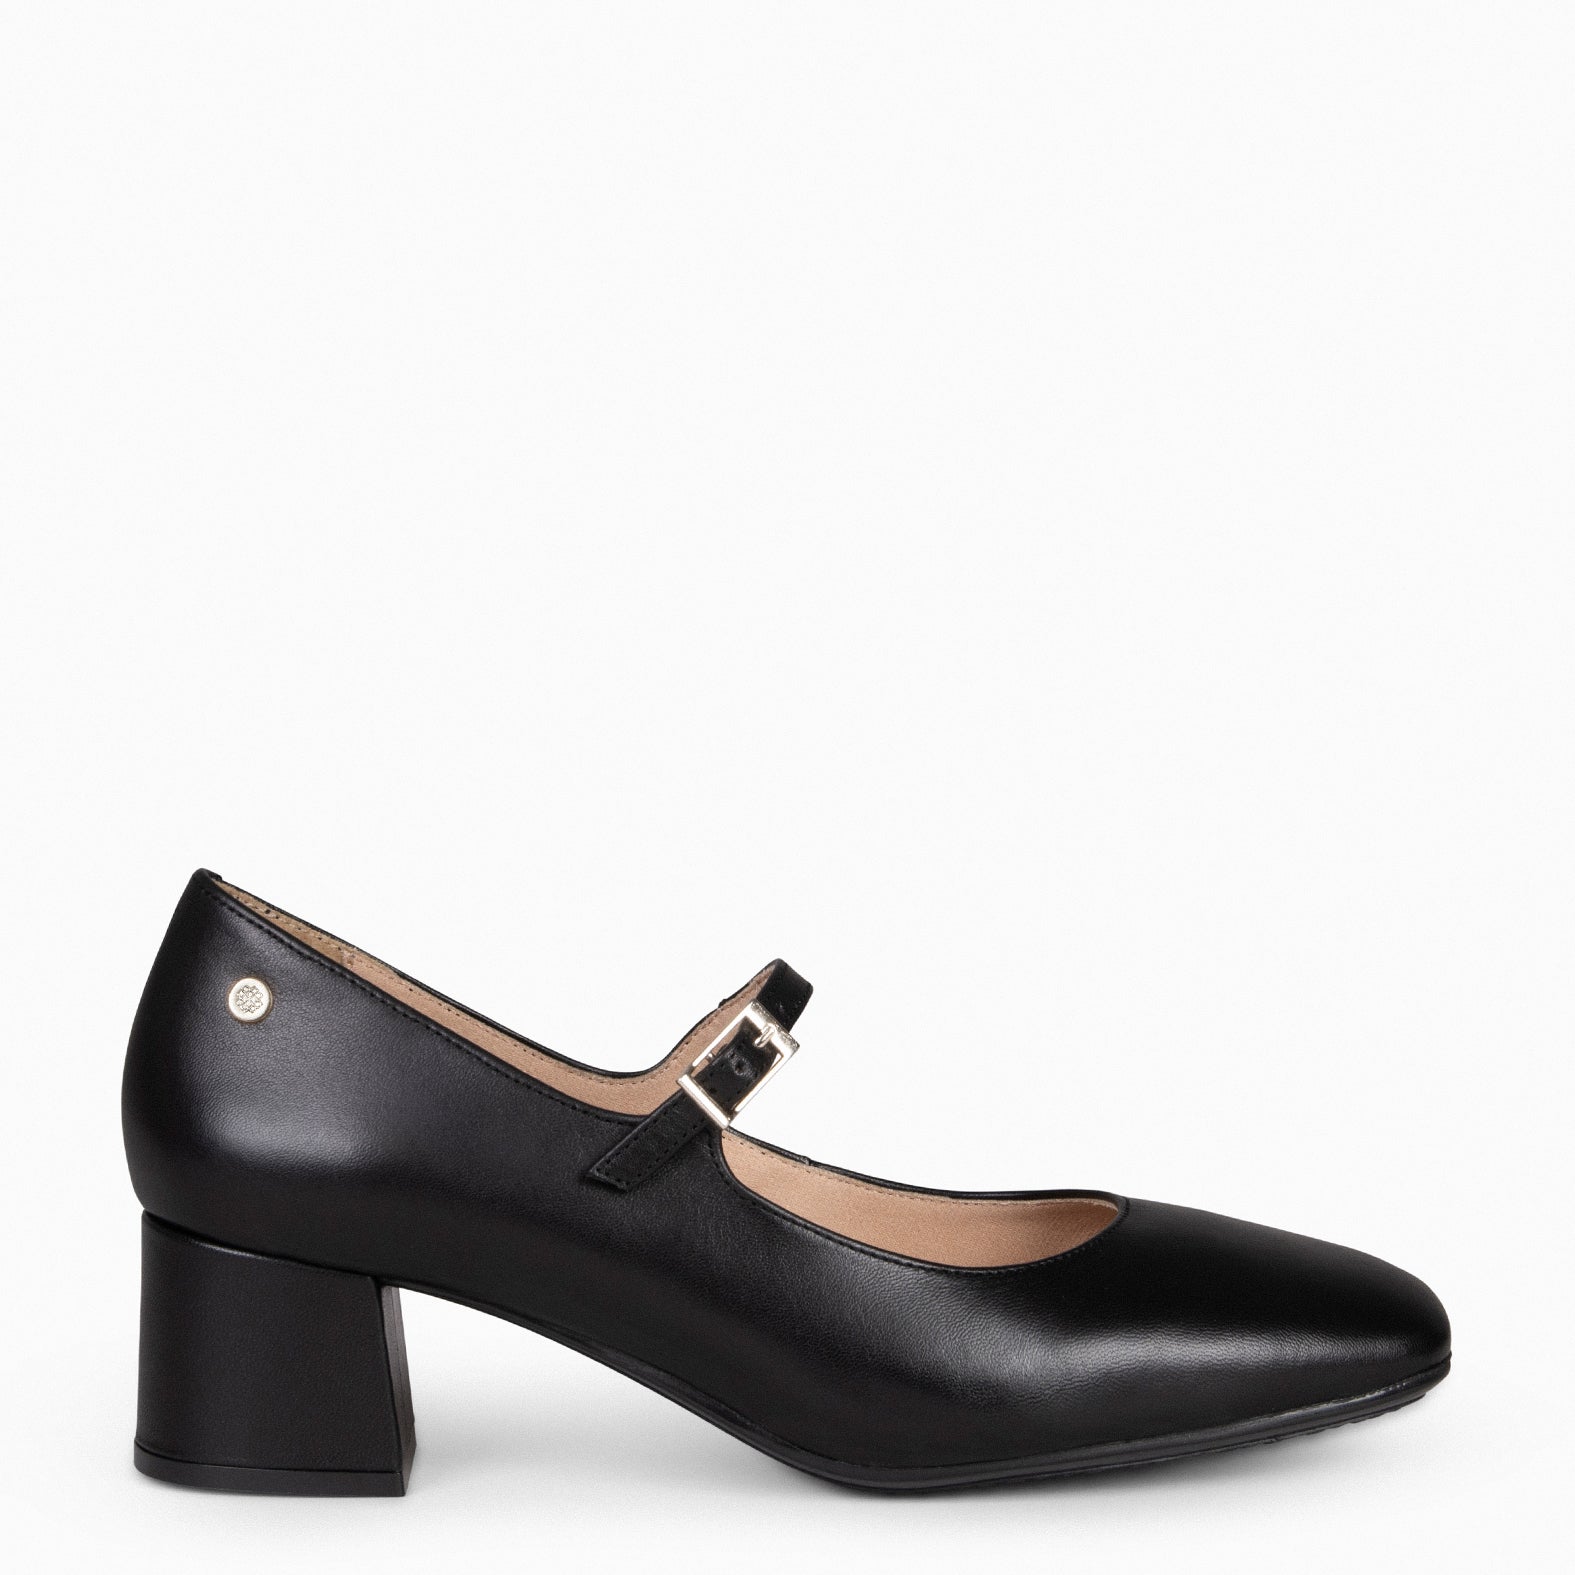 BELLA – BLACK suede leather mary-jane shoes